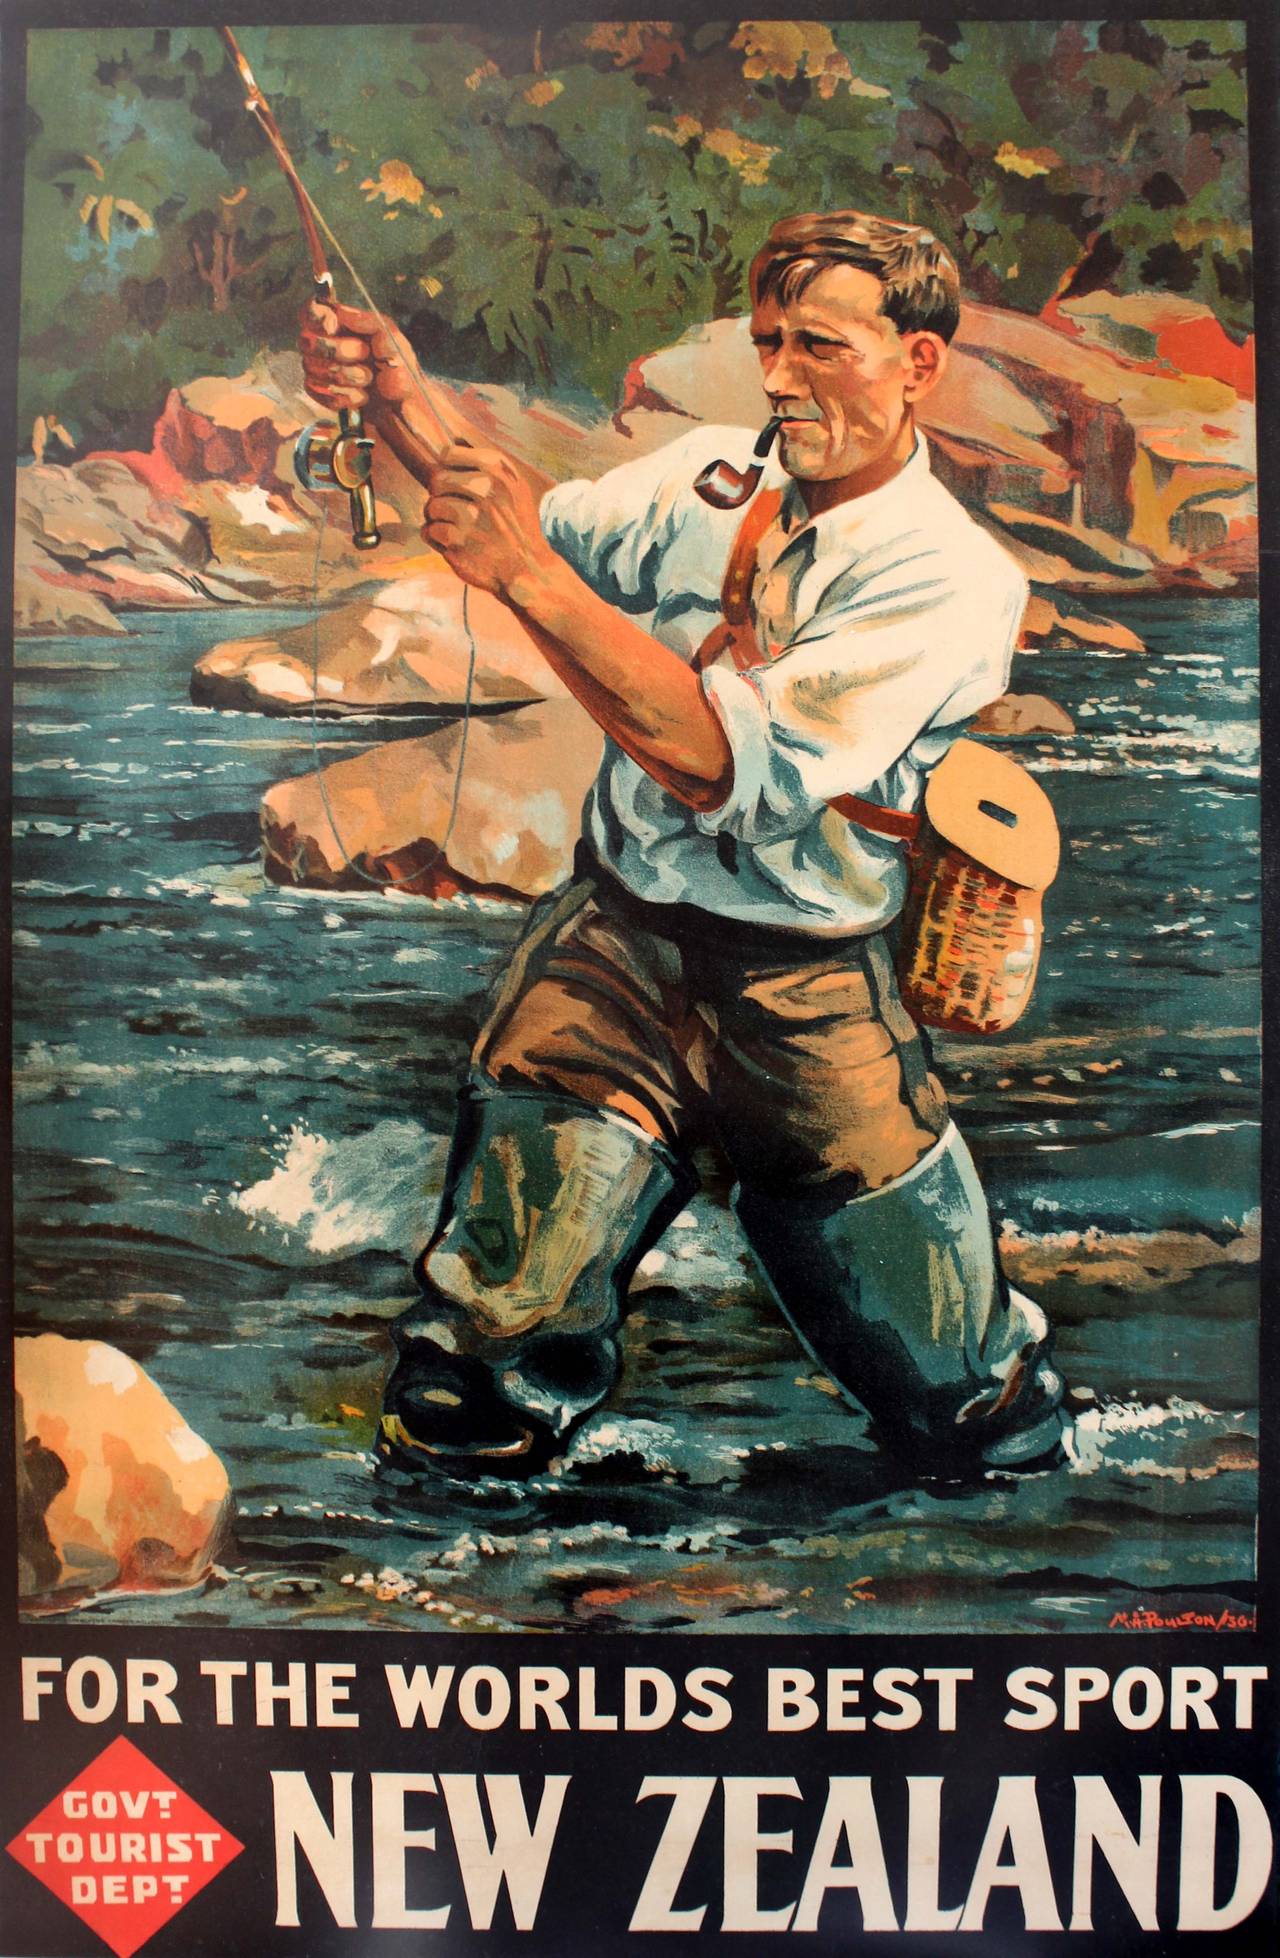 Maurice Poulton - Original Vintage Travel Poster: New Zealand Fly Fishing,  The World's Best Sport at 1stDibs